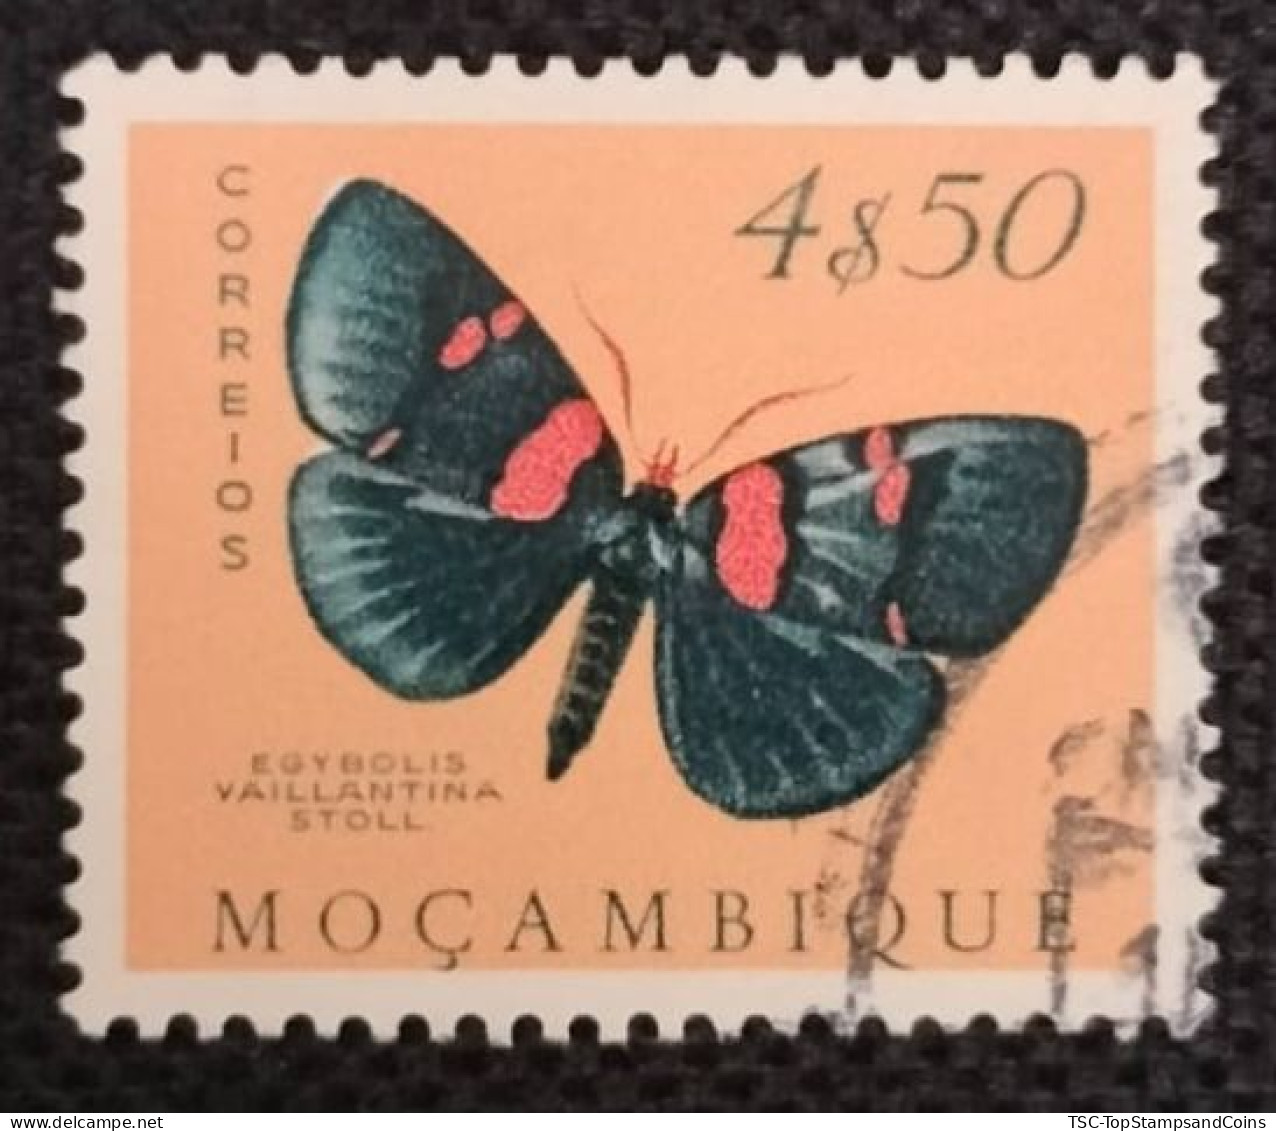 MOZPO0402UE - Mozambique Butterflies - 4$50 Used Stamp - Mozambique - 1953 - Mosambik